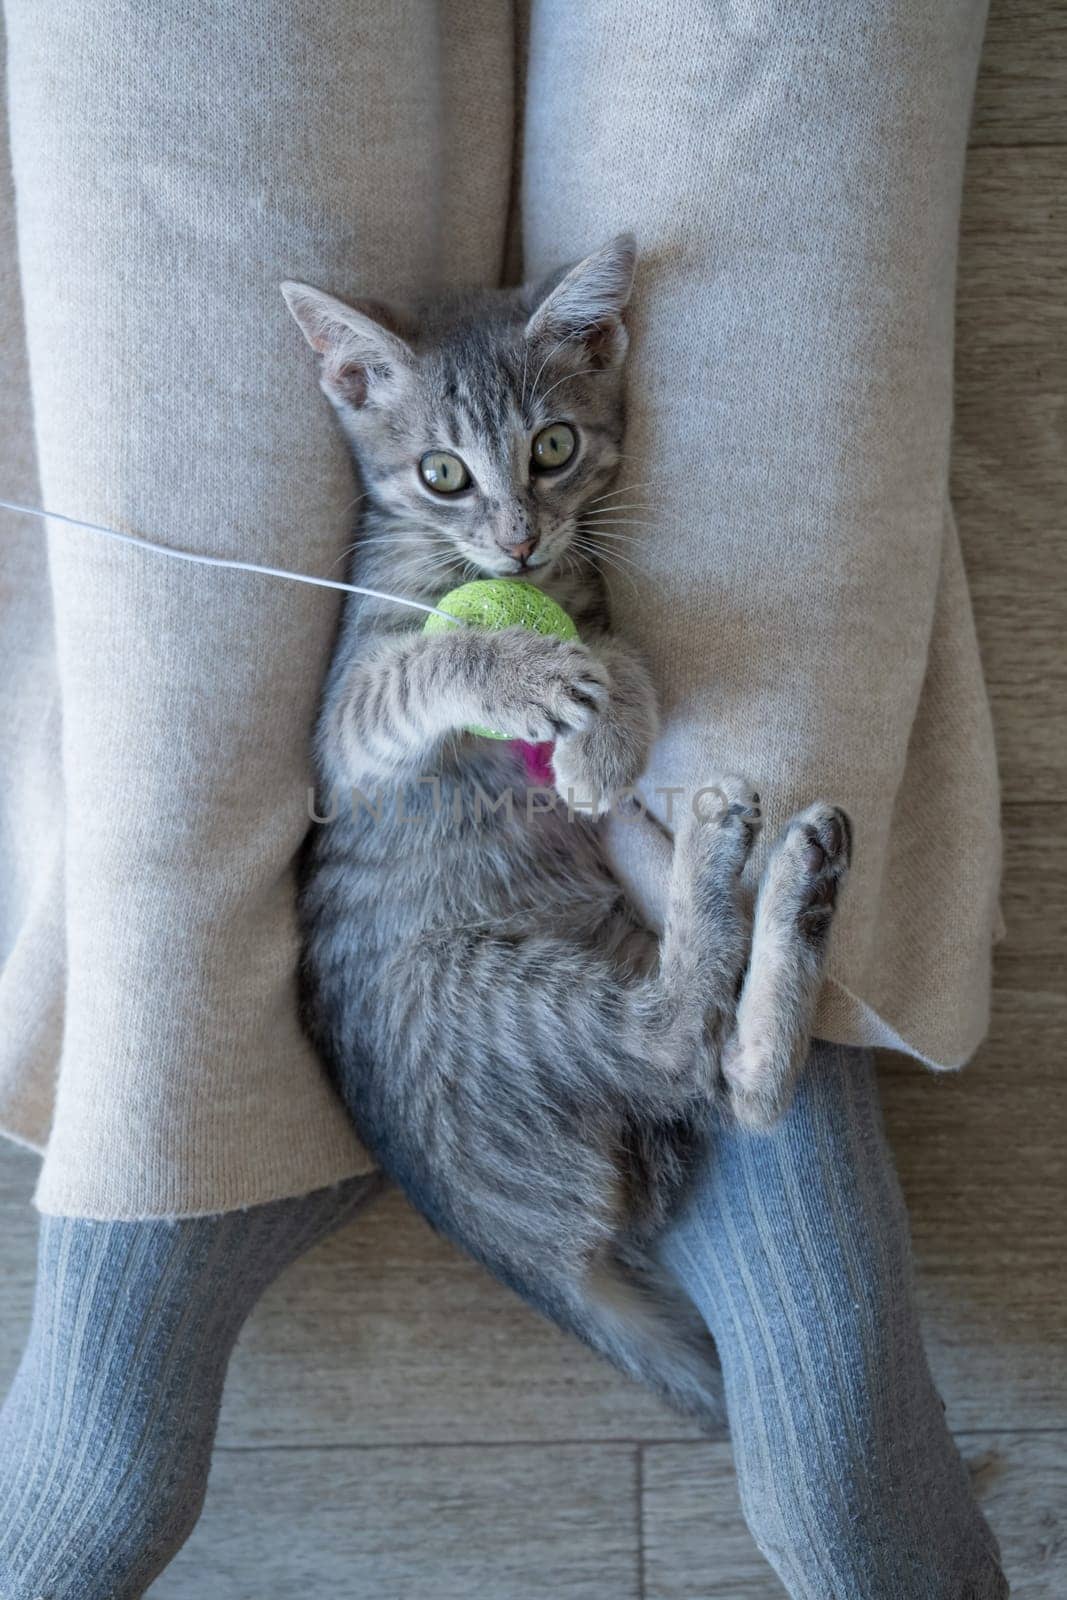 Pet care. cute gray kitten lying on legs and playing toy